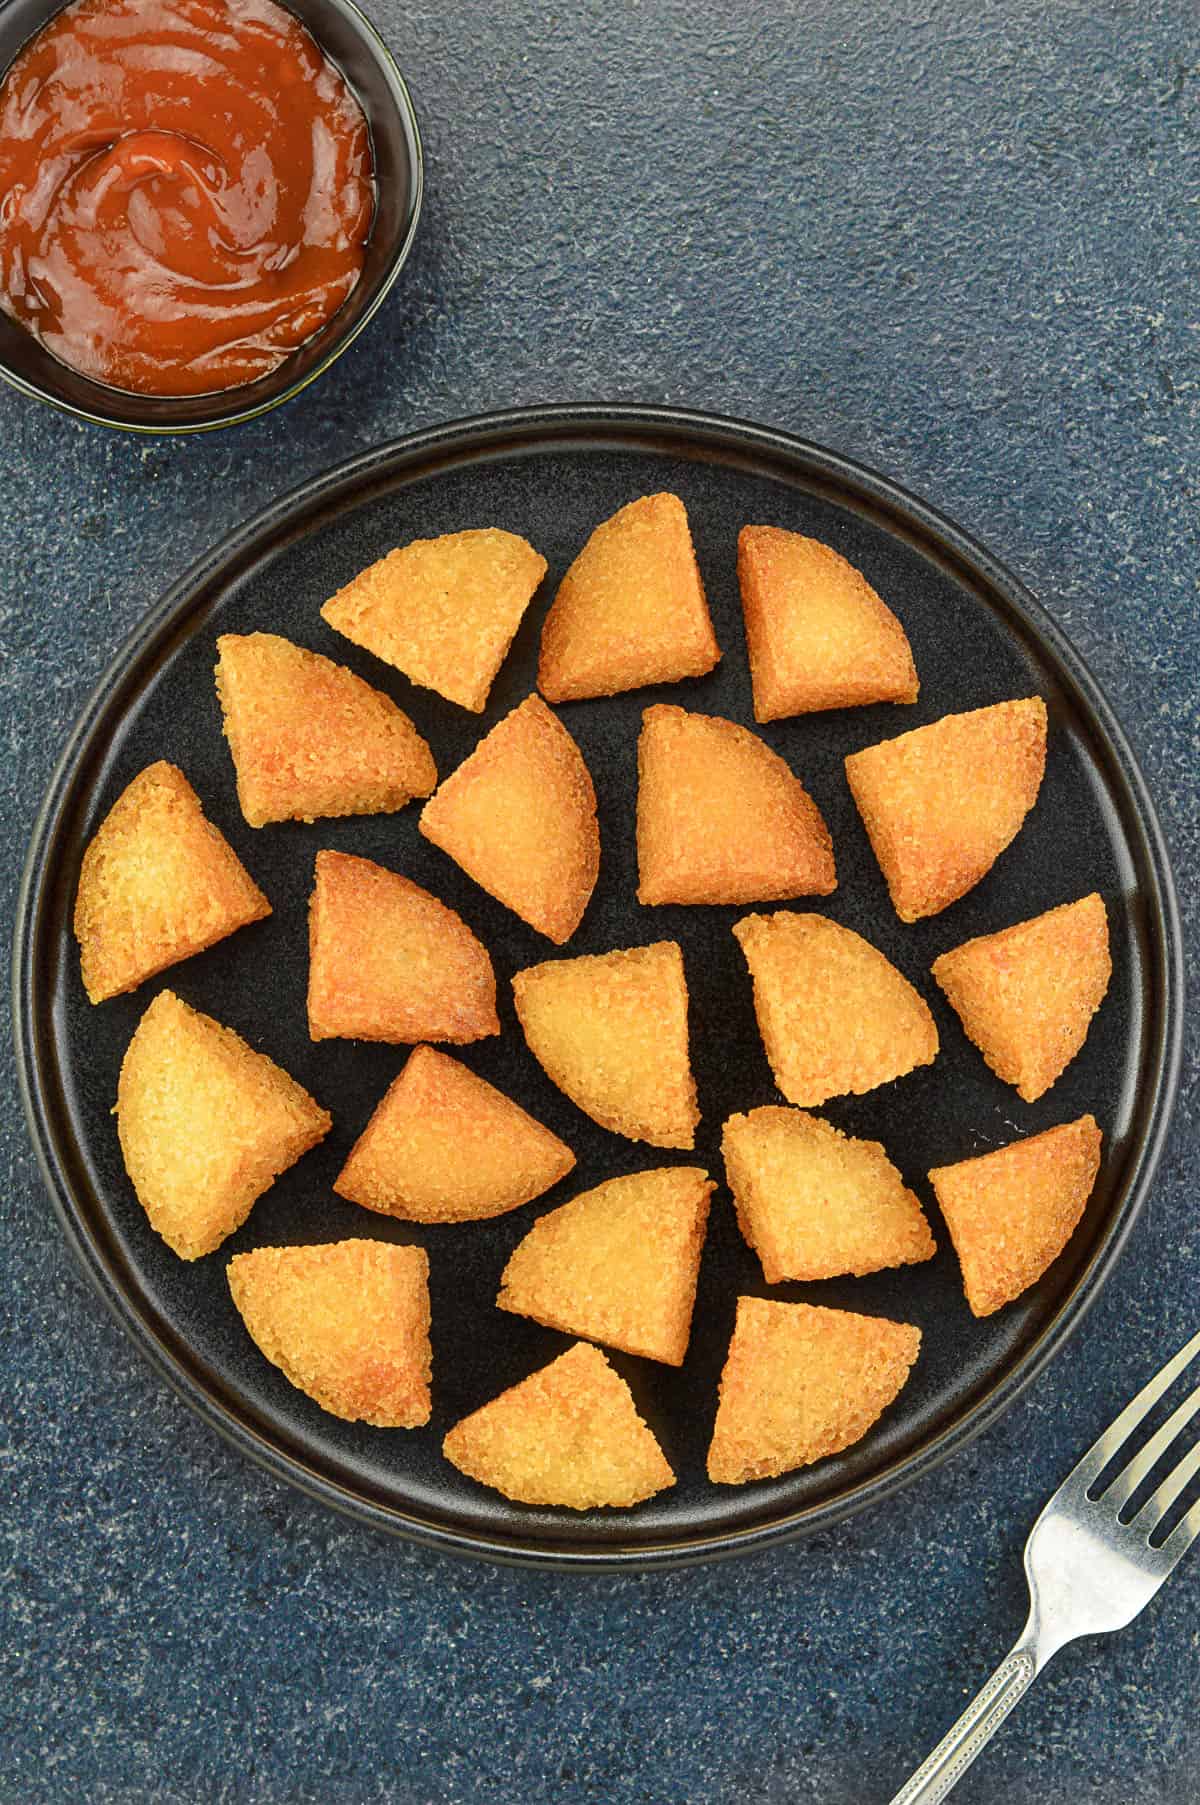 top shot of a plate of crispy deep fried idli bites, served with a schezwan chutney dip on the side